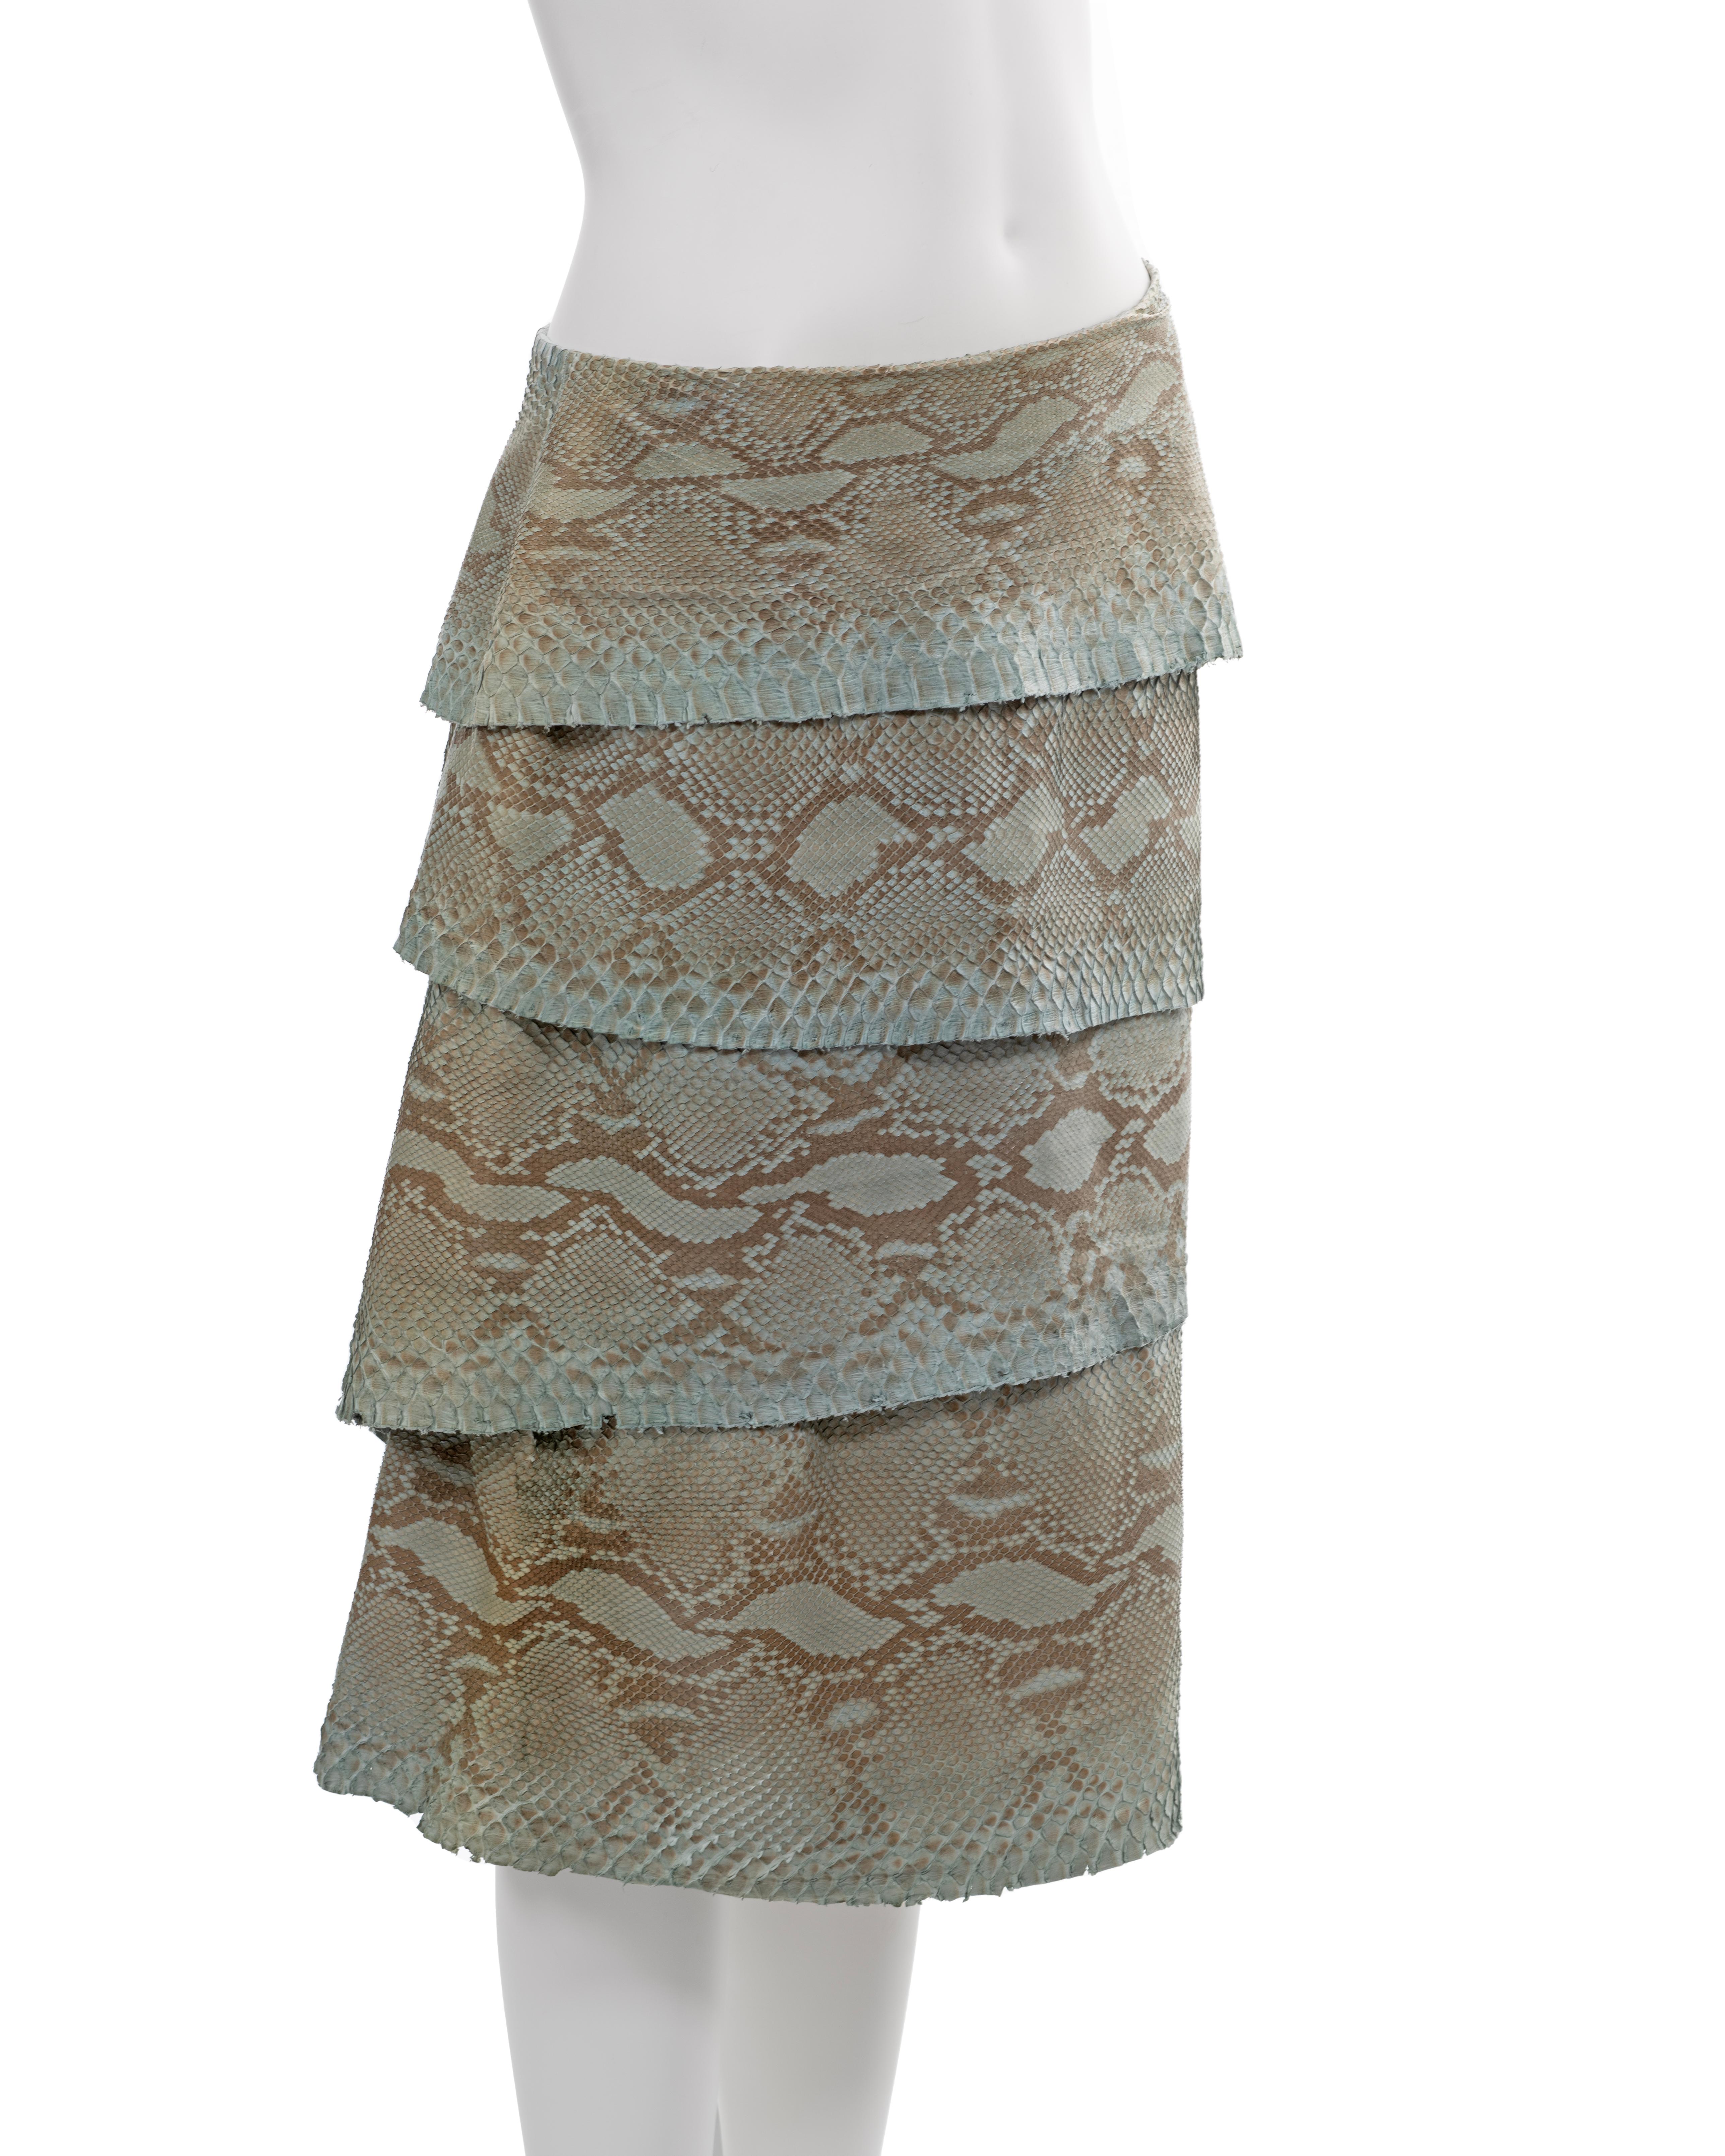 Gianni Versace turquoise python tiered skirt, fw 1999 For Sale 3